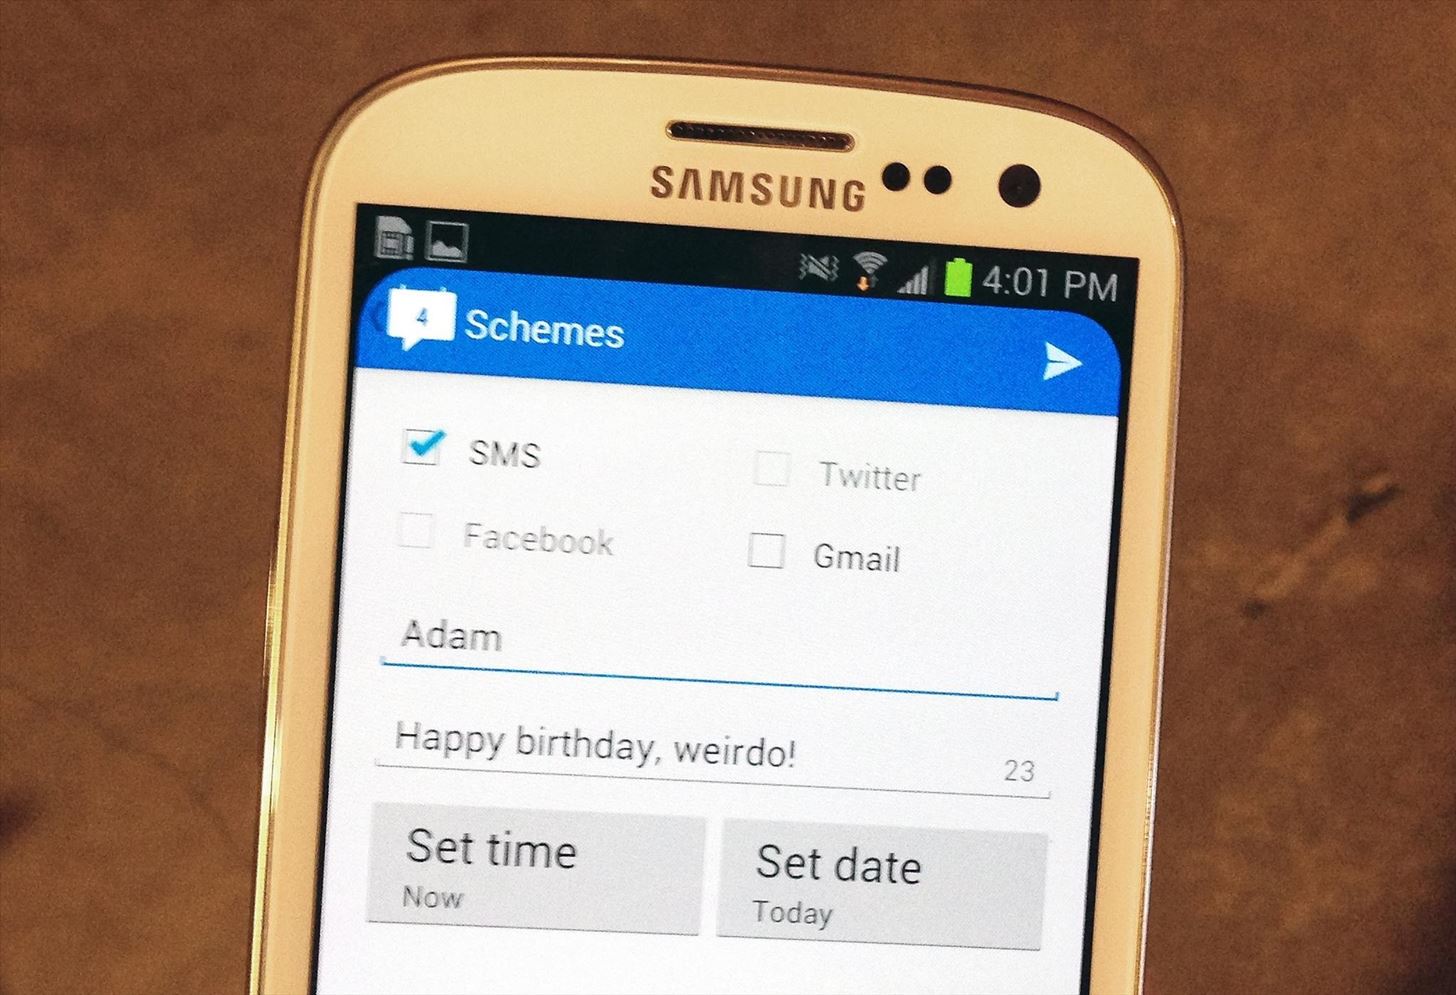 Forget Remembering! Schedule Recurring Texts, Emails, Tweets, & Facebook Posts on Your Samsung Galaxy S3